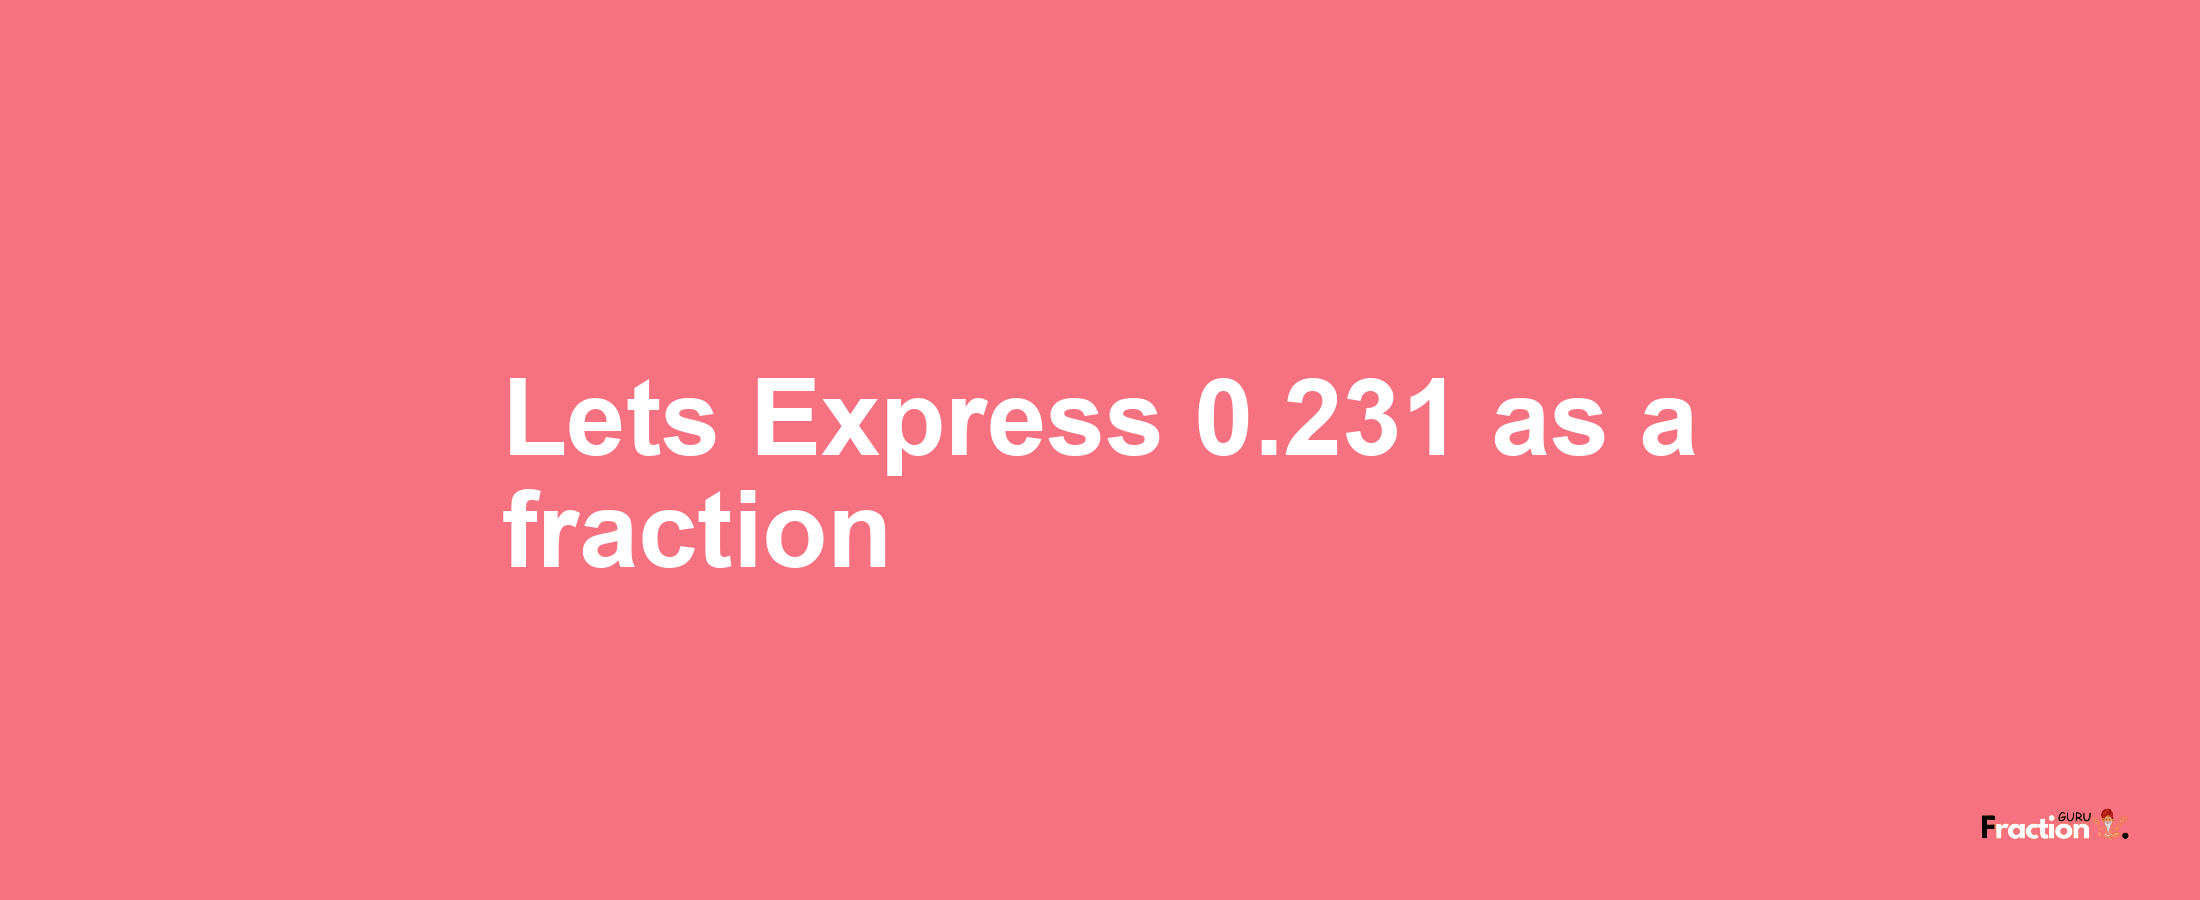 Lets Express 0.231 as afraction